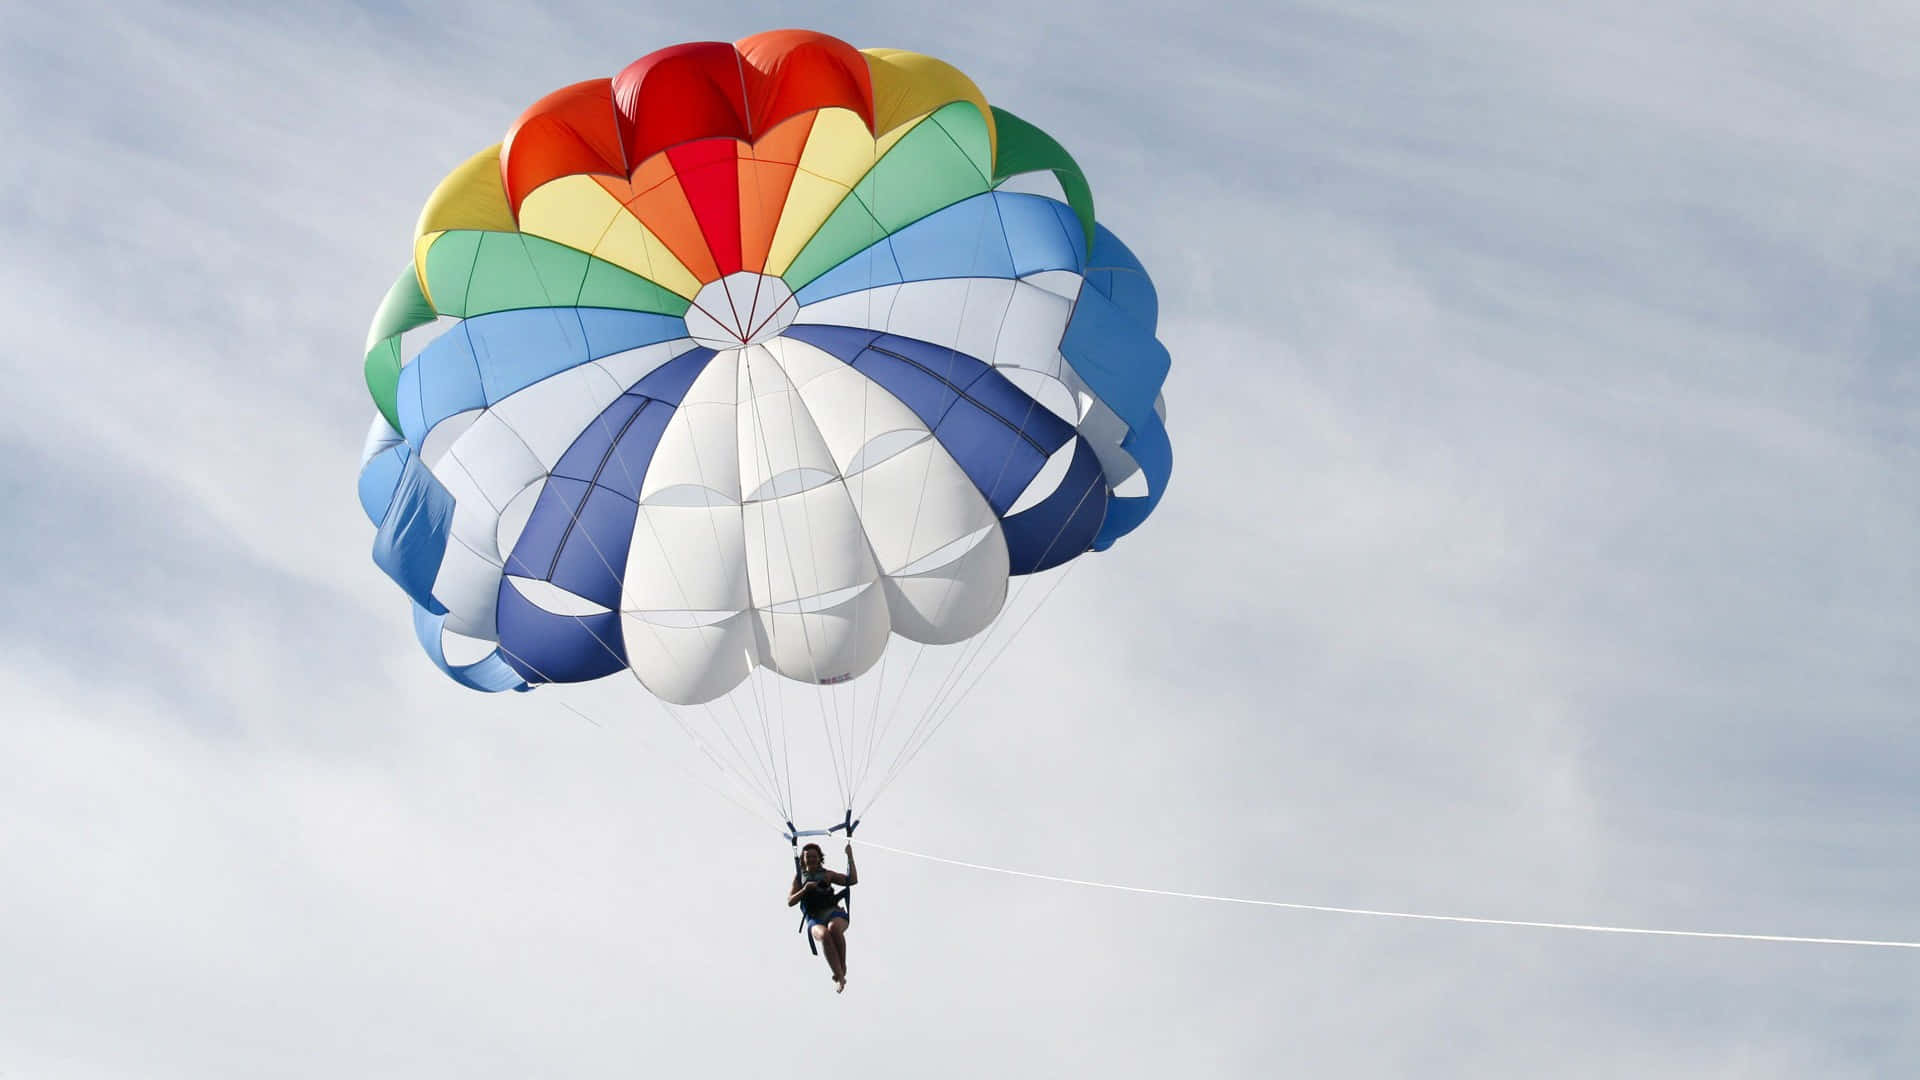 Colorful Parachute Skydiving Picture